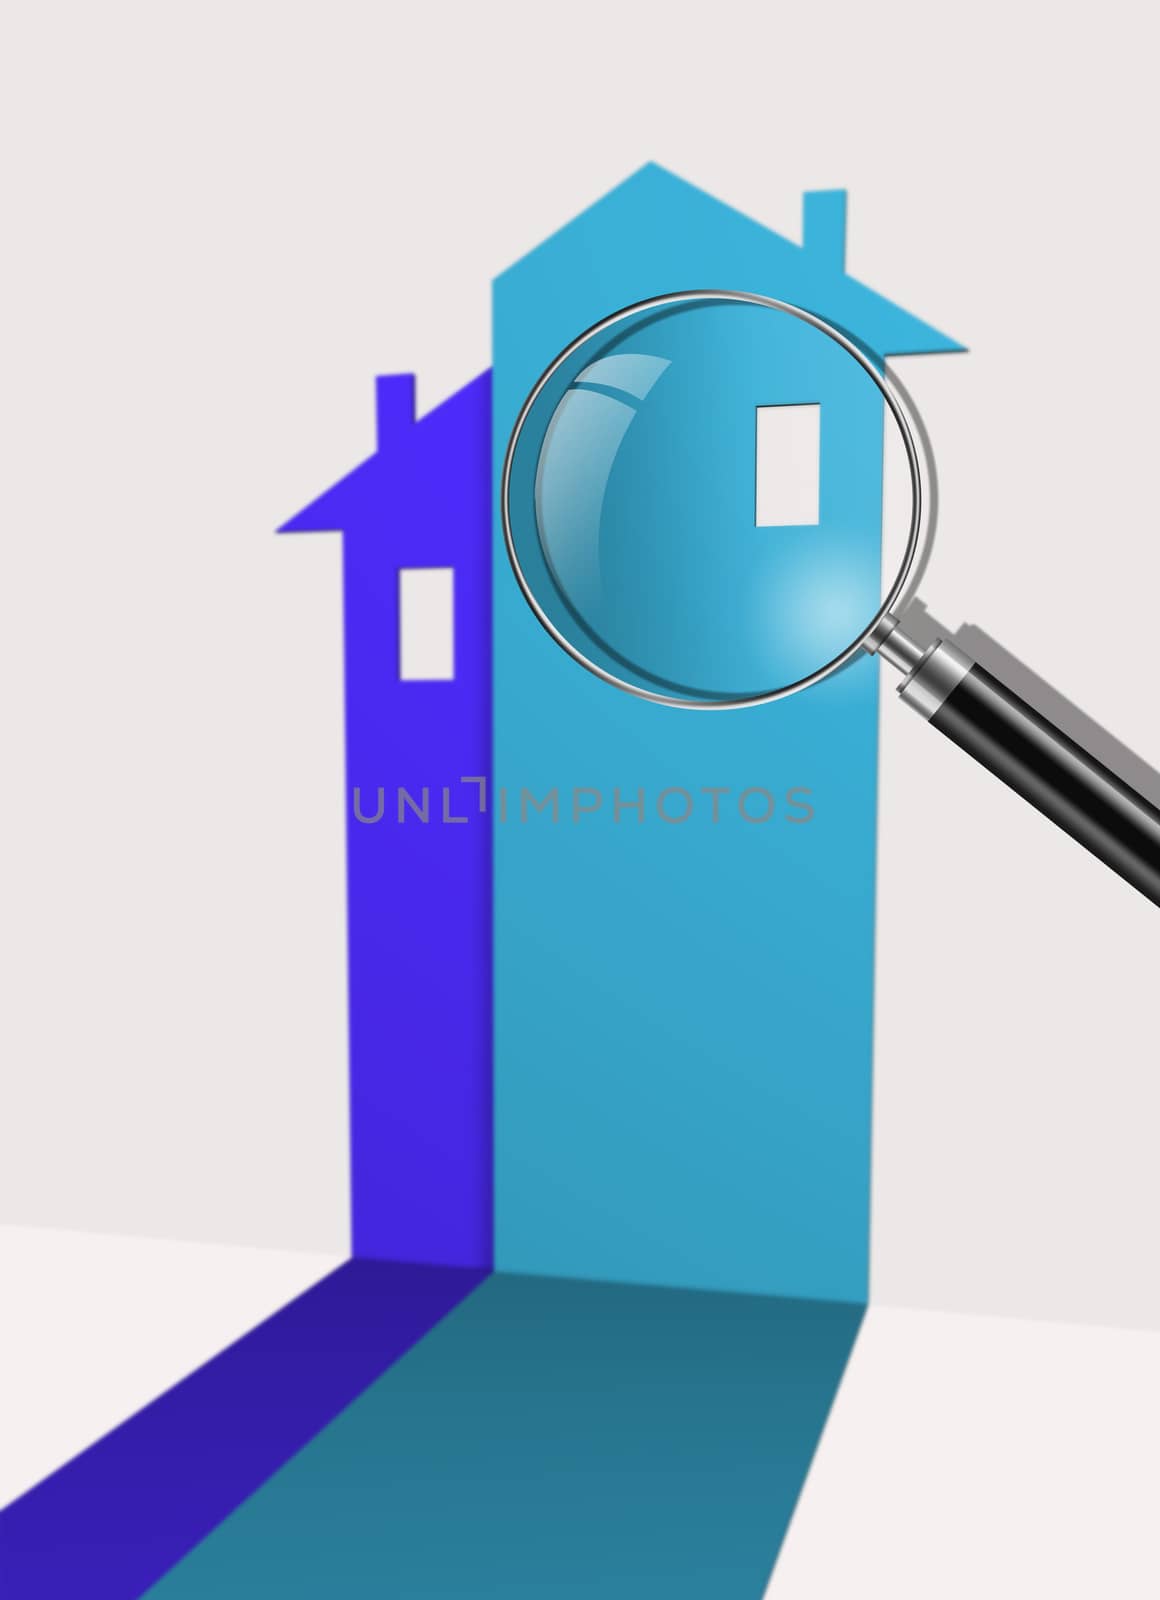 Real estate symbol icon made in 3d software